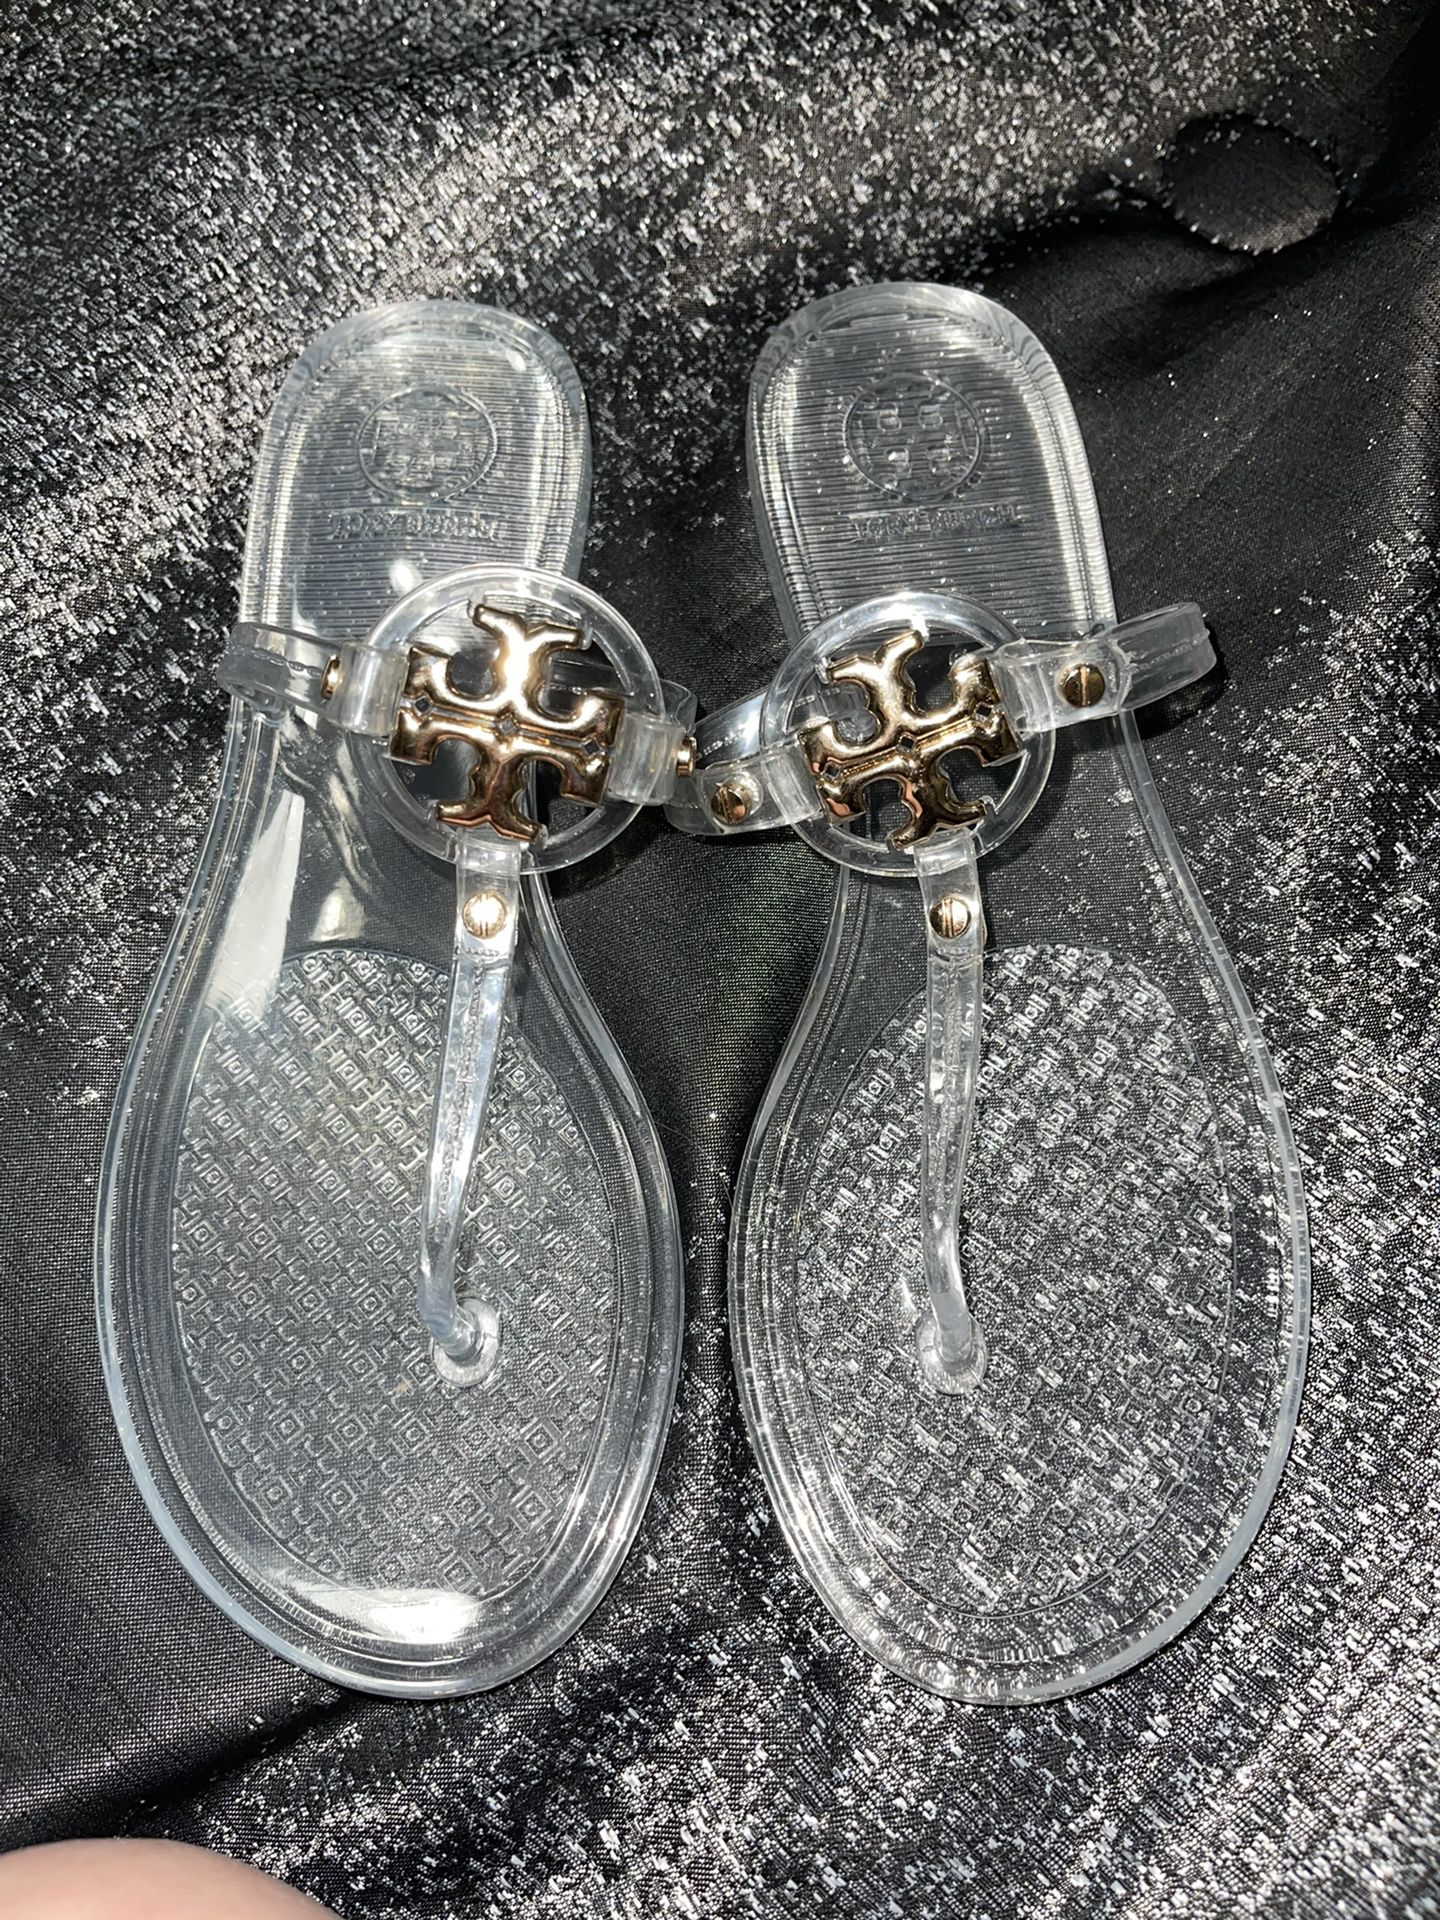 Tory Burch Sandals for Sale in Tampa, FL - OfferUp